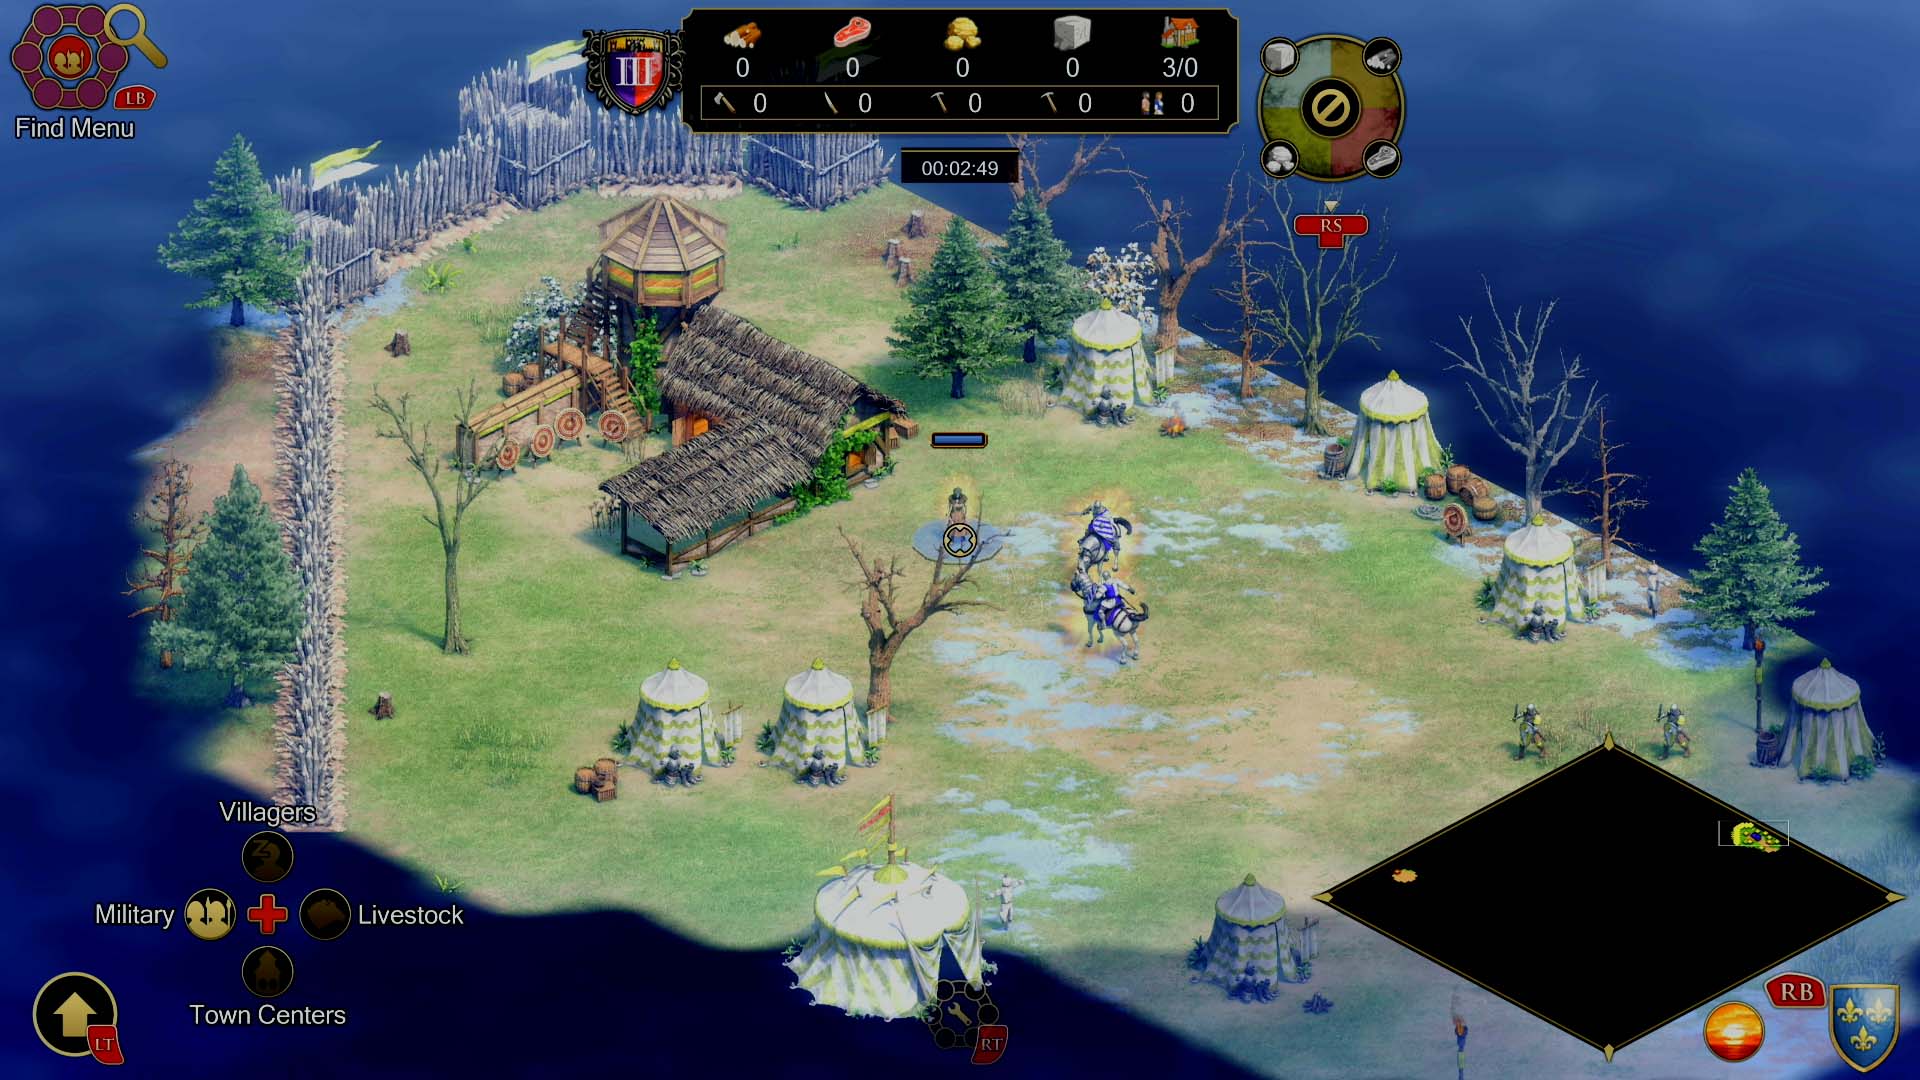 Age of Empires II’s Xbox edition features surprisingly great gamepad controls